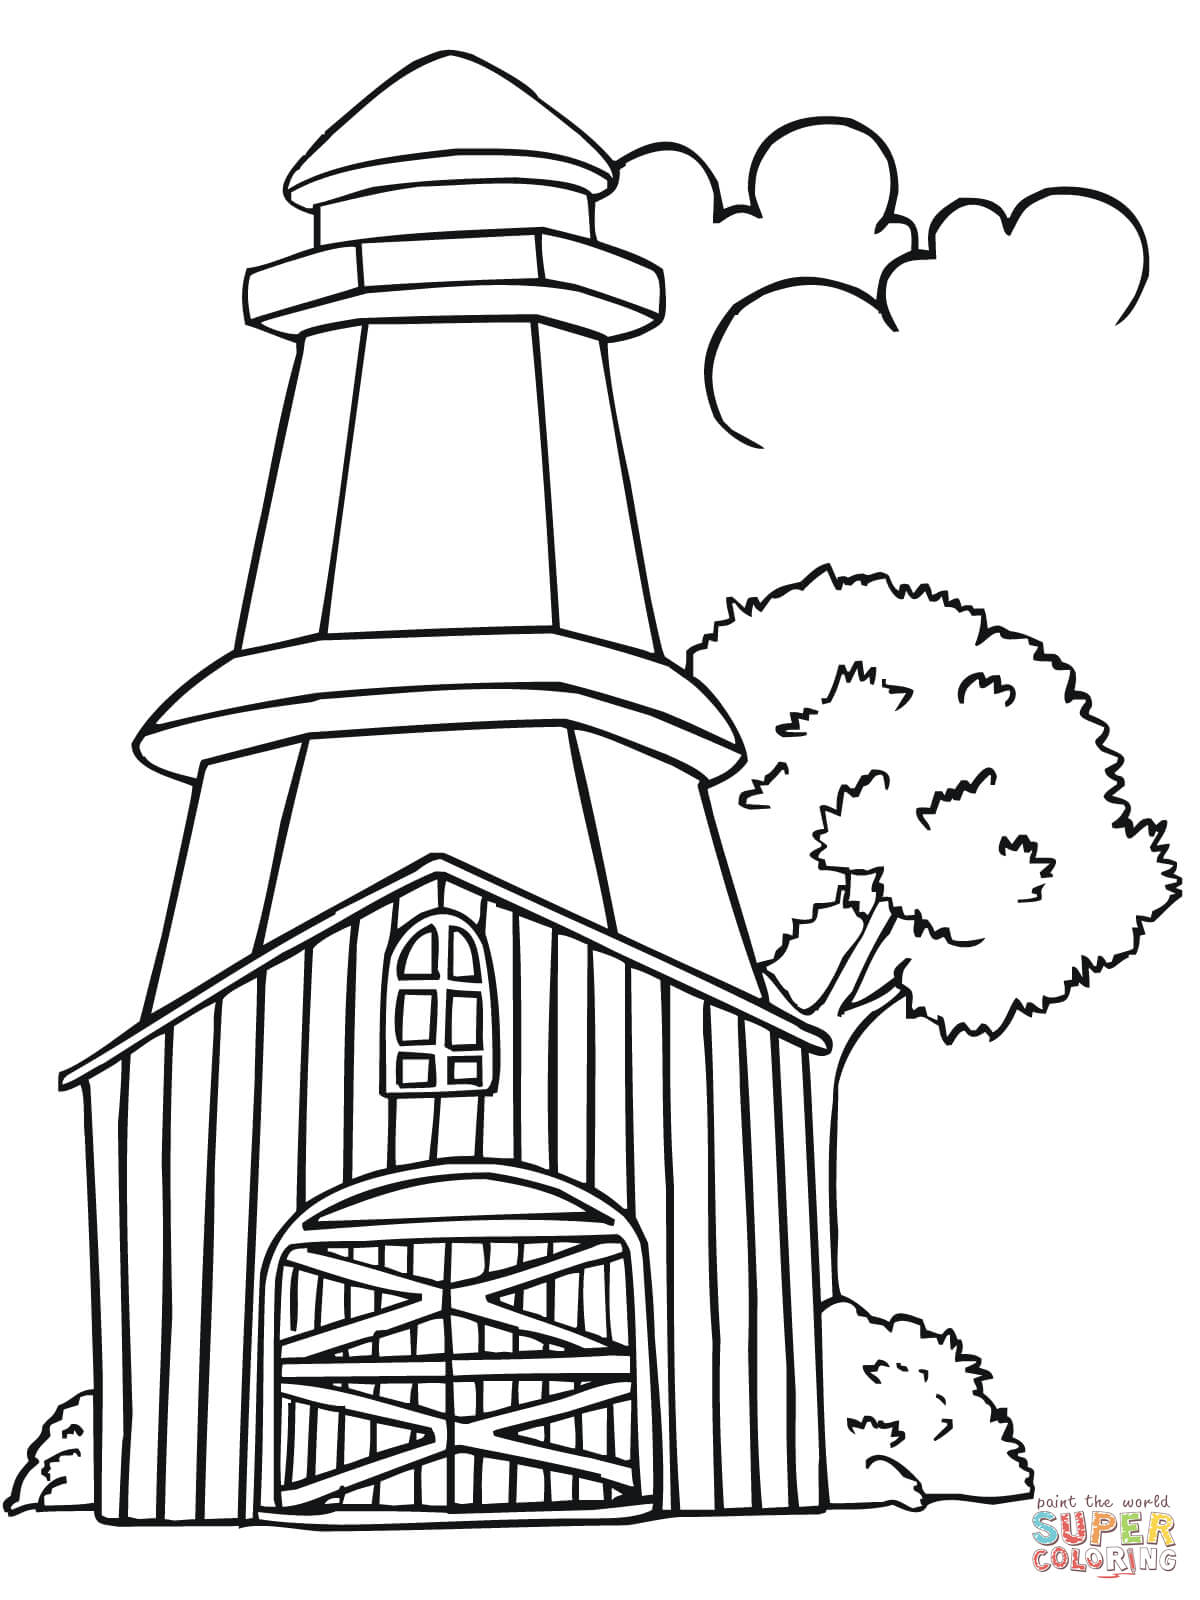 Sweden Lighthouse coloring page | Free Printable Coloring Pages